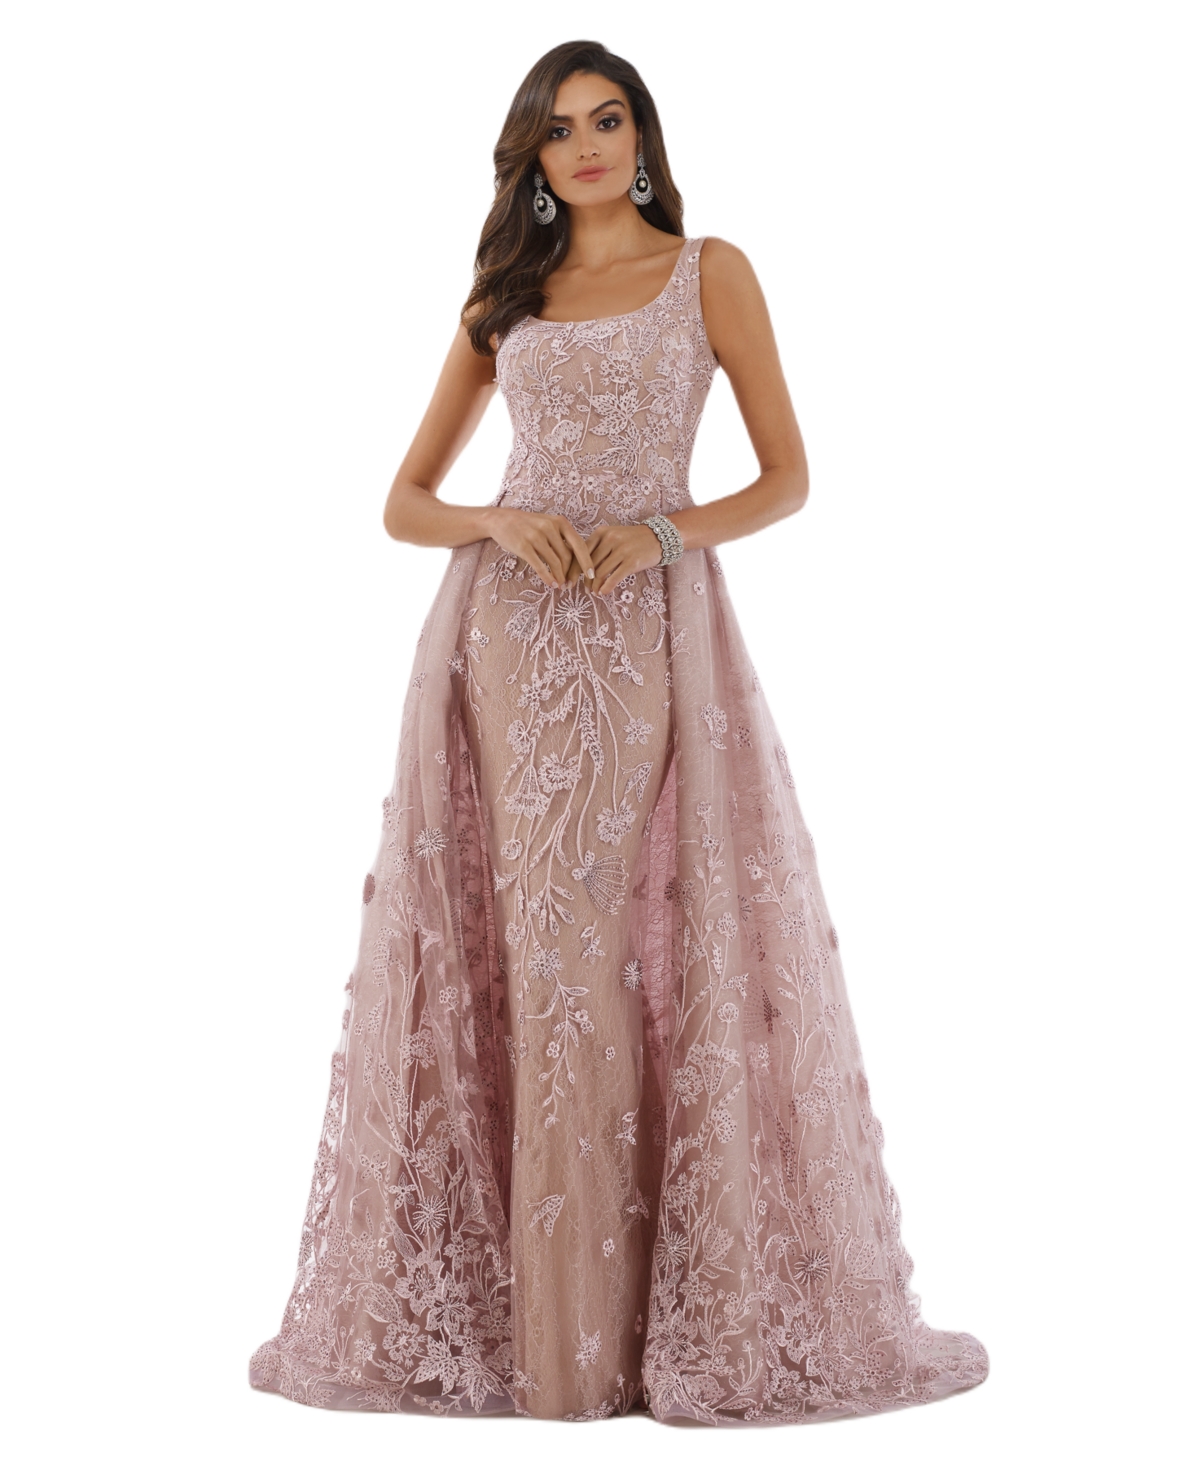 Women's Overskirt Lace Fitted Gown - Dusty pink